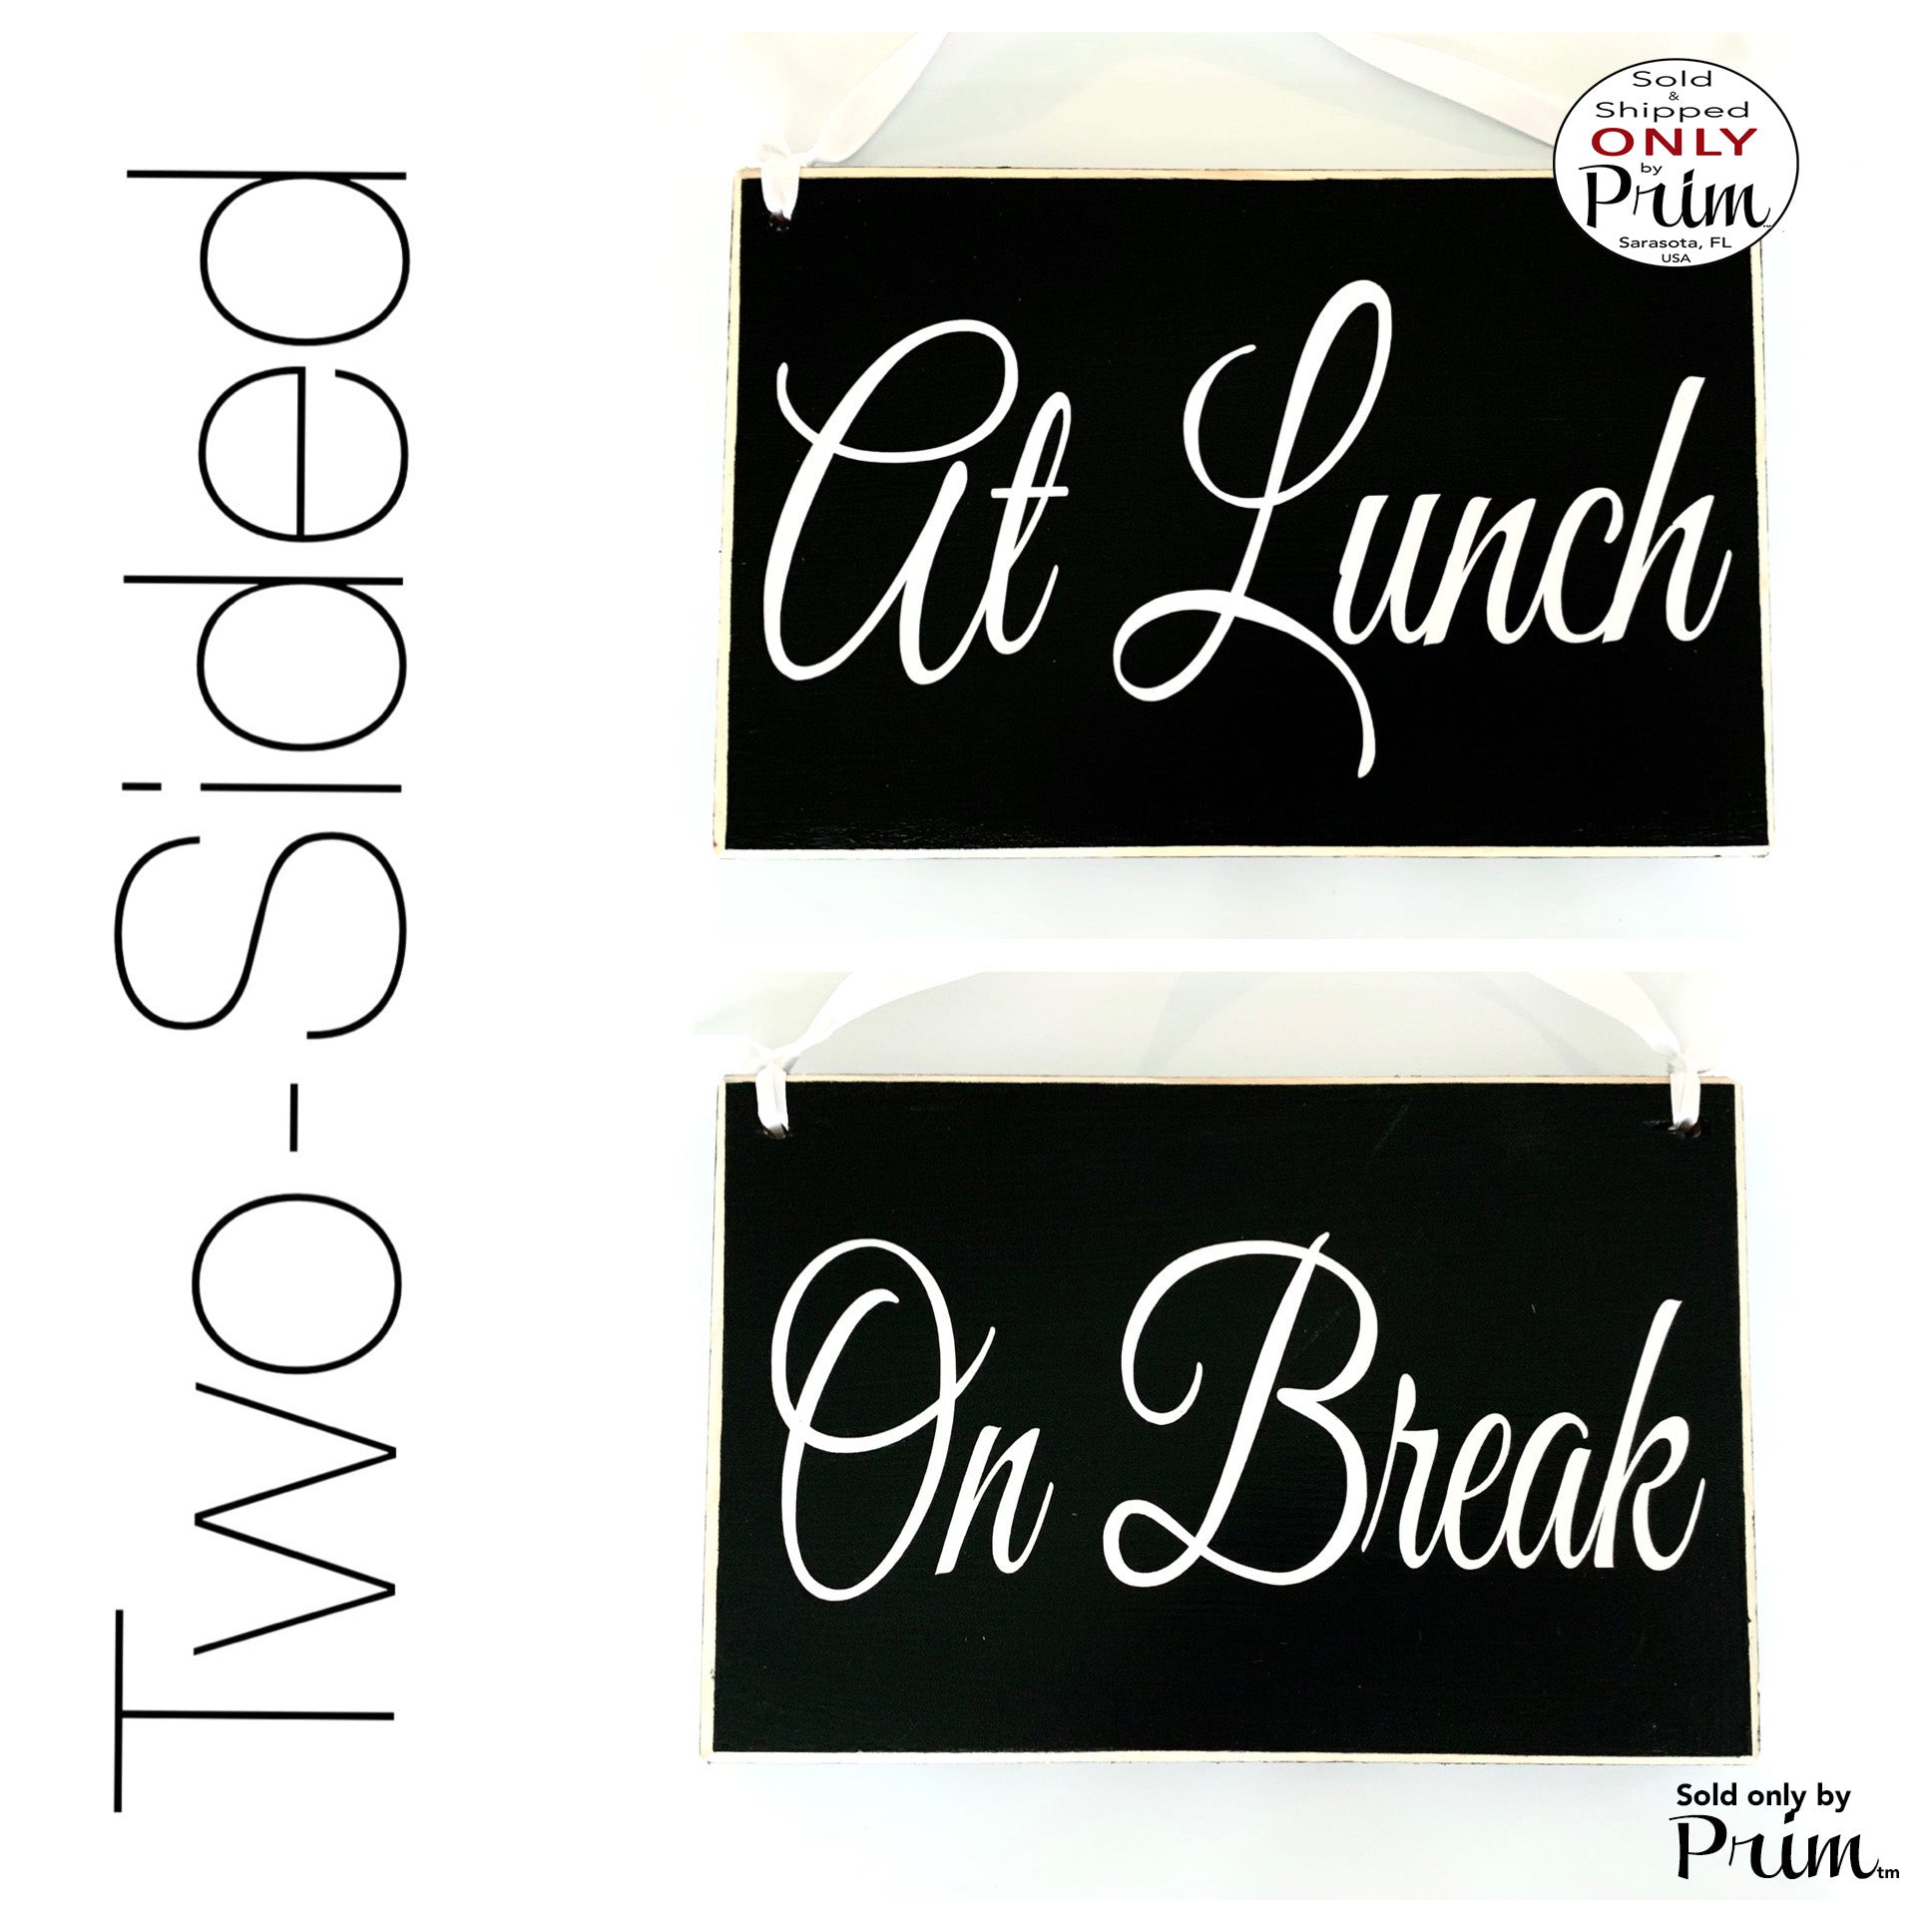 Designs by Prim At Lunch At Break Two Sided 8x6 Out of Office Sorry We Missed You Welcome Come On In Custom Wood Sign Open Closed Spa Salon Office Door Hanger